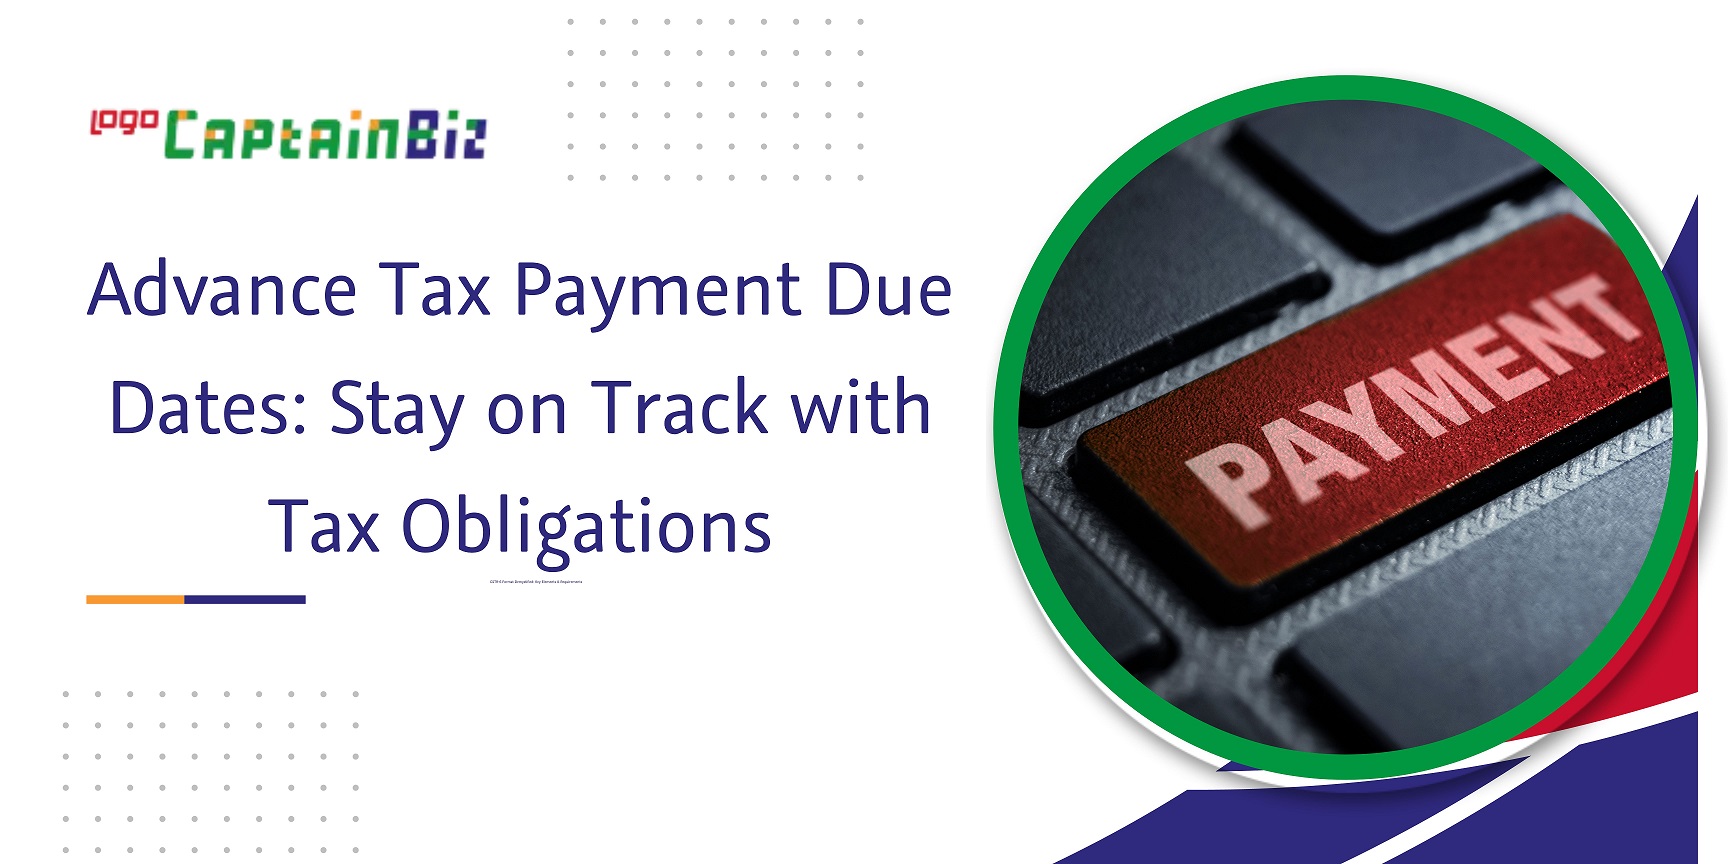 CaptainBiz: advance tax payment due dates stay on track with tax obligations